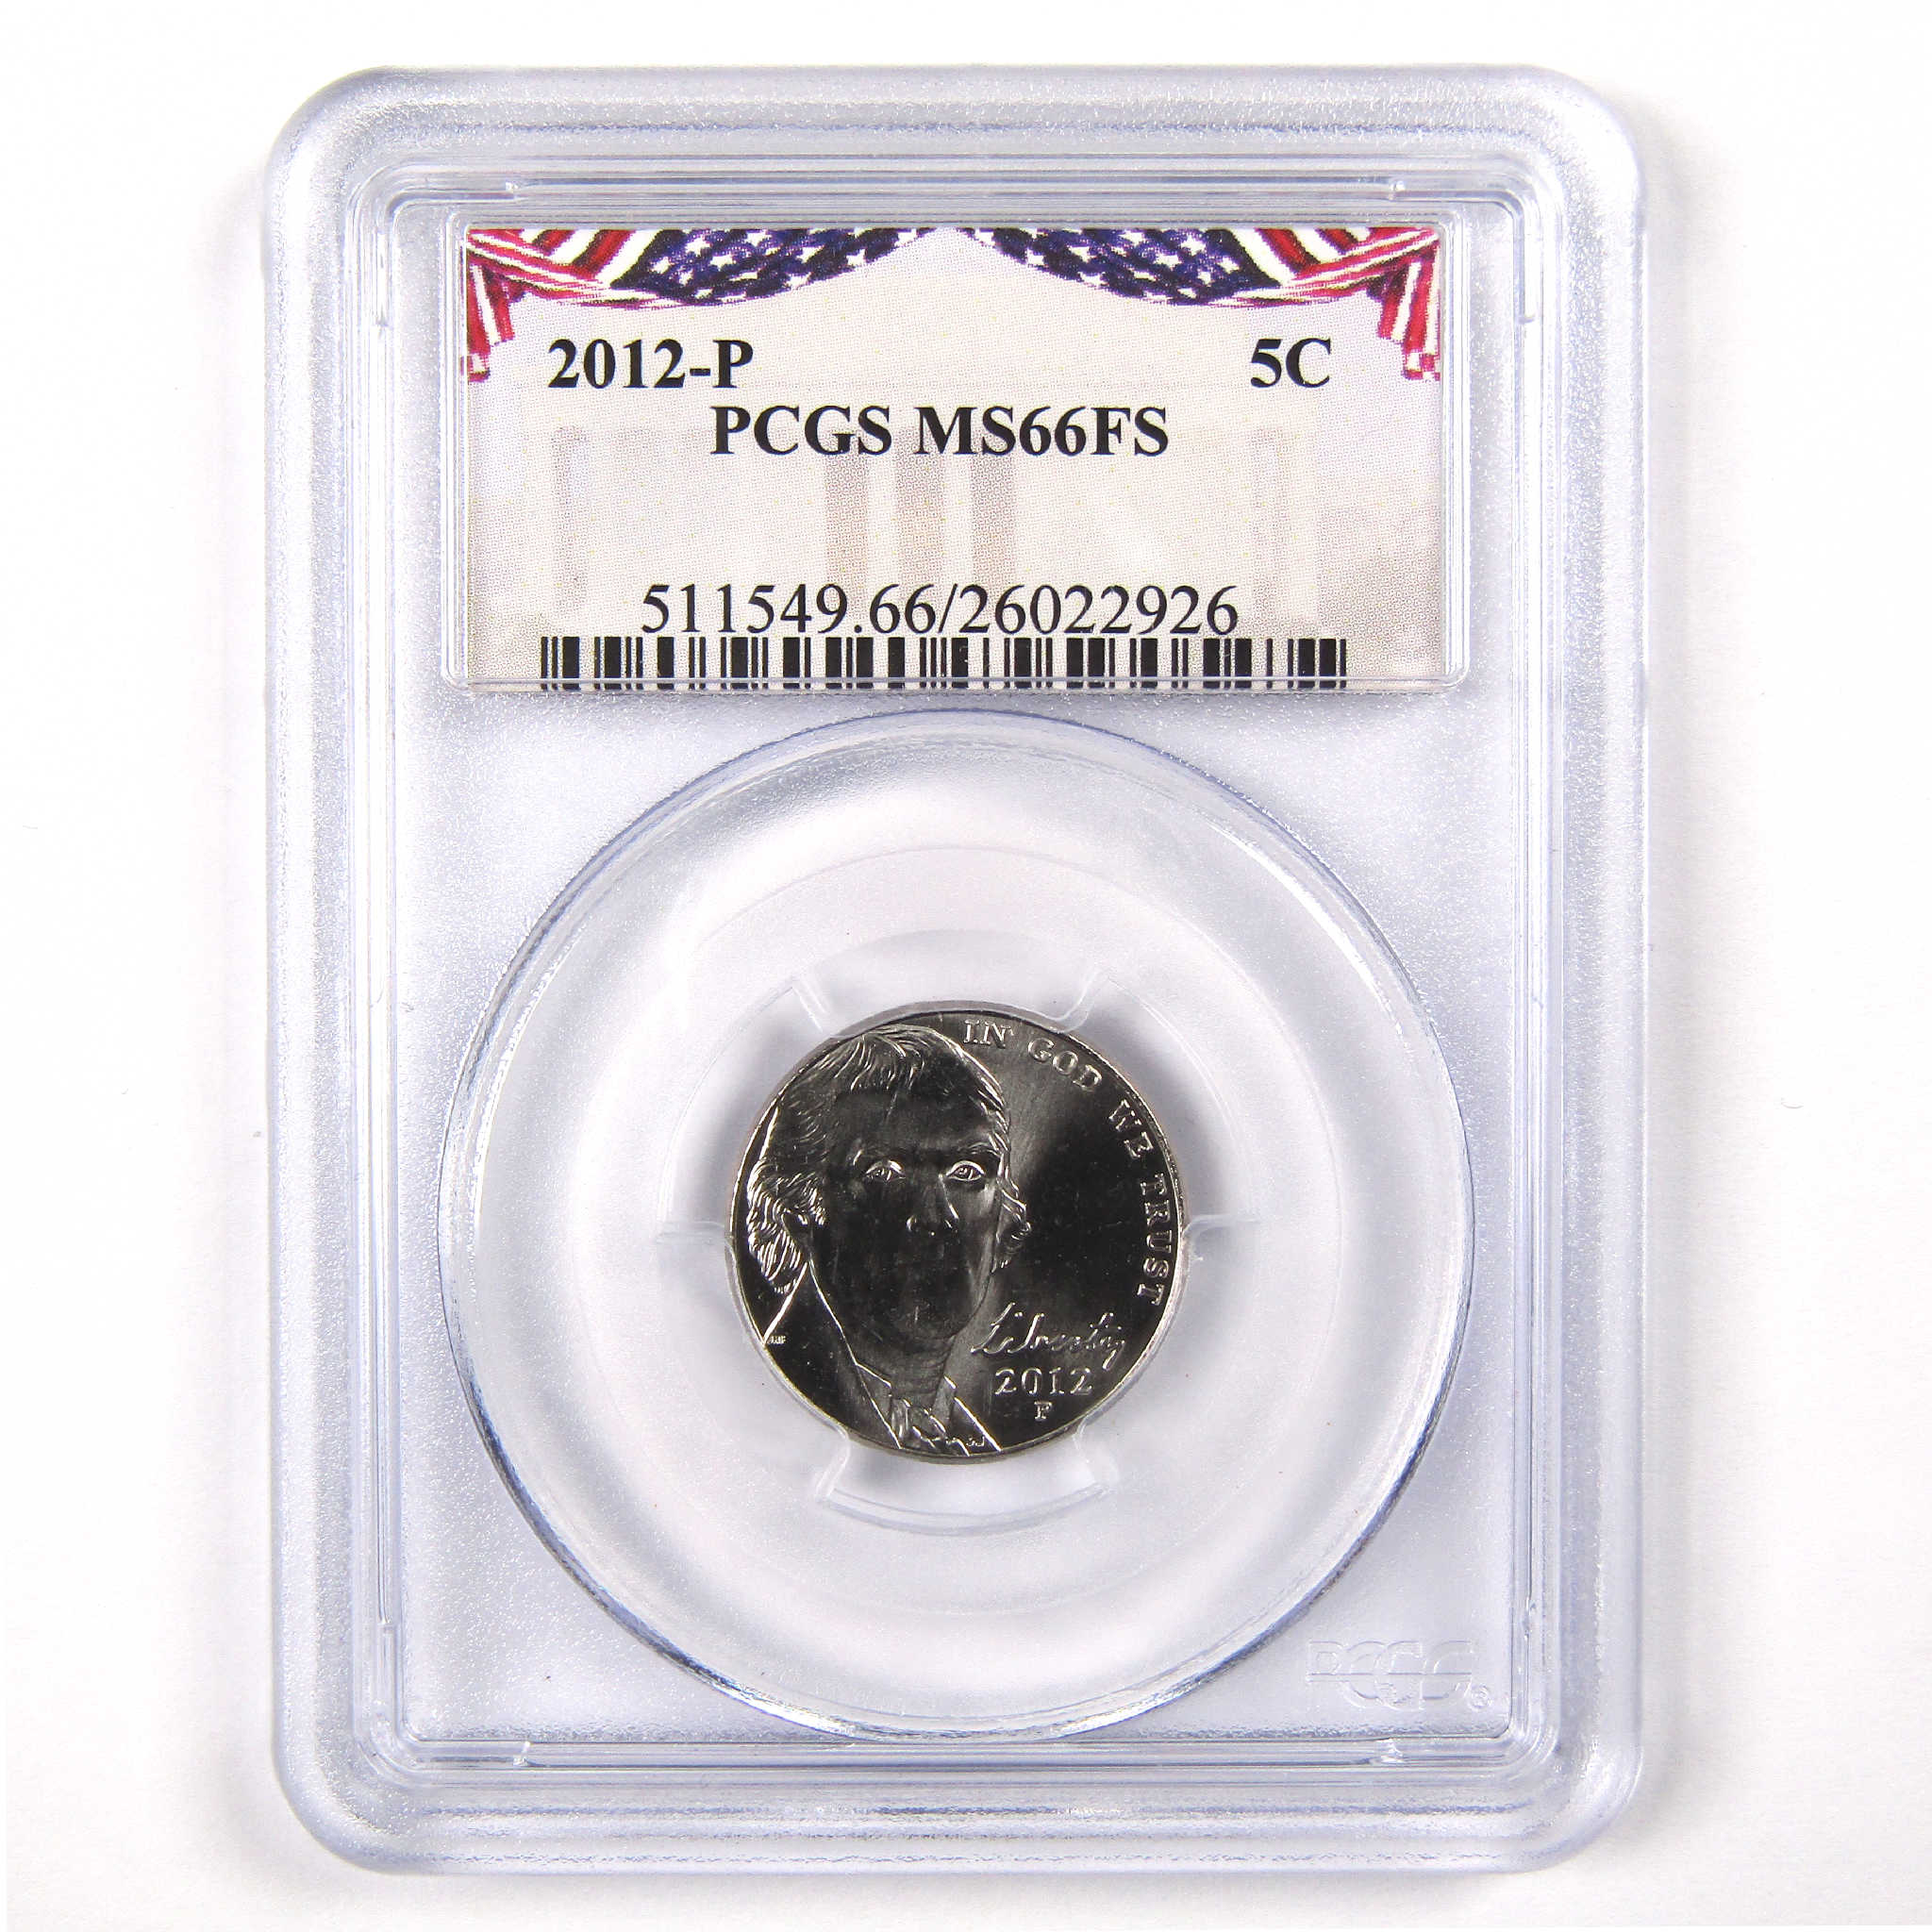 2012 P Jefferson Nickel MS 66 FS PCGS 5c Uncirculated Coin SKU:CPC5480